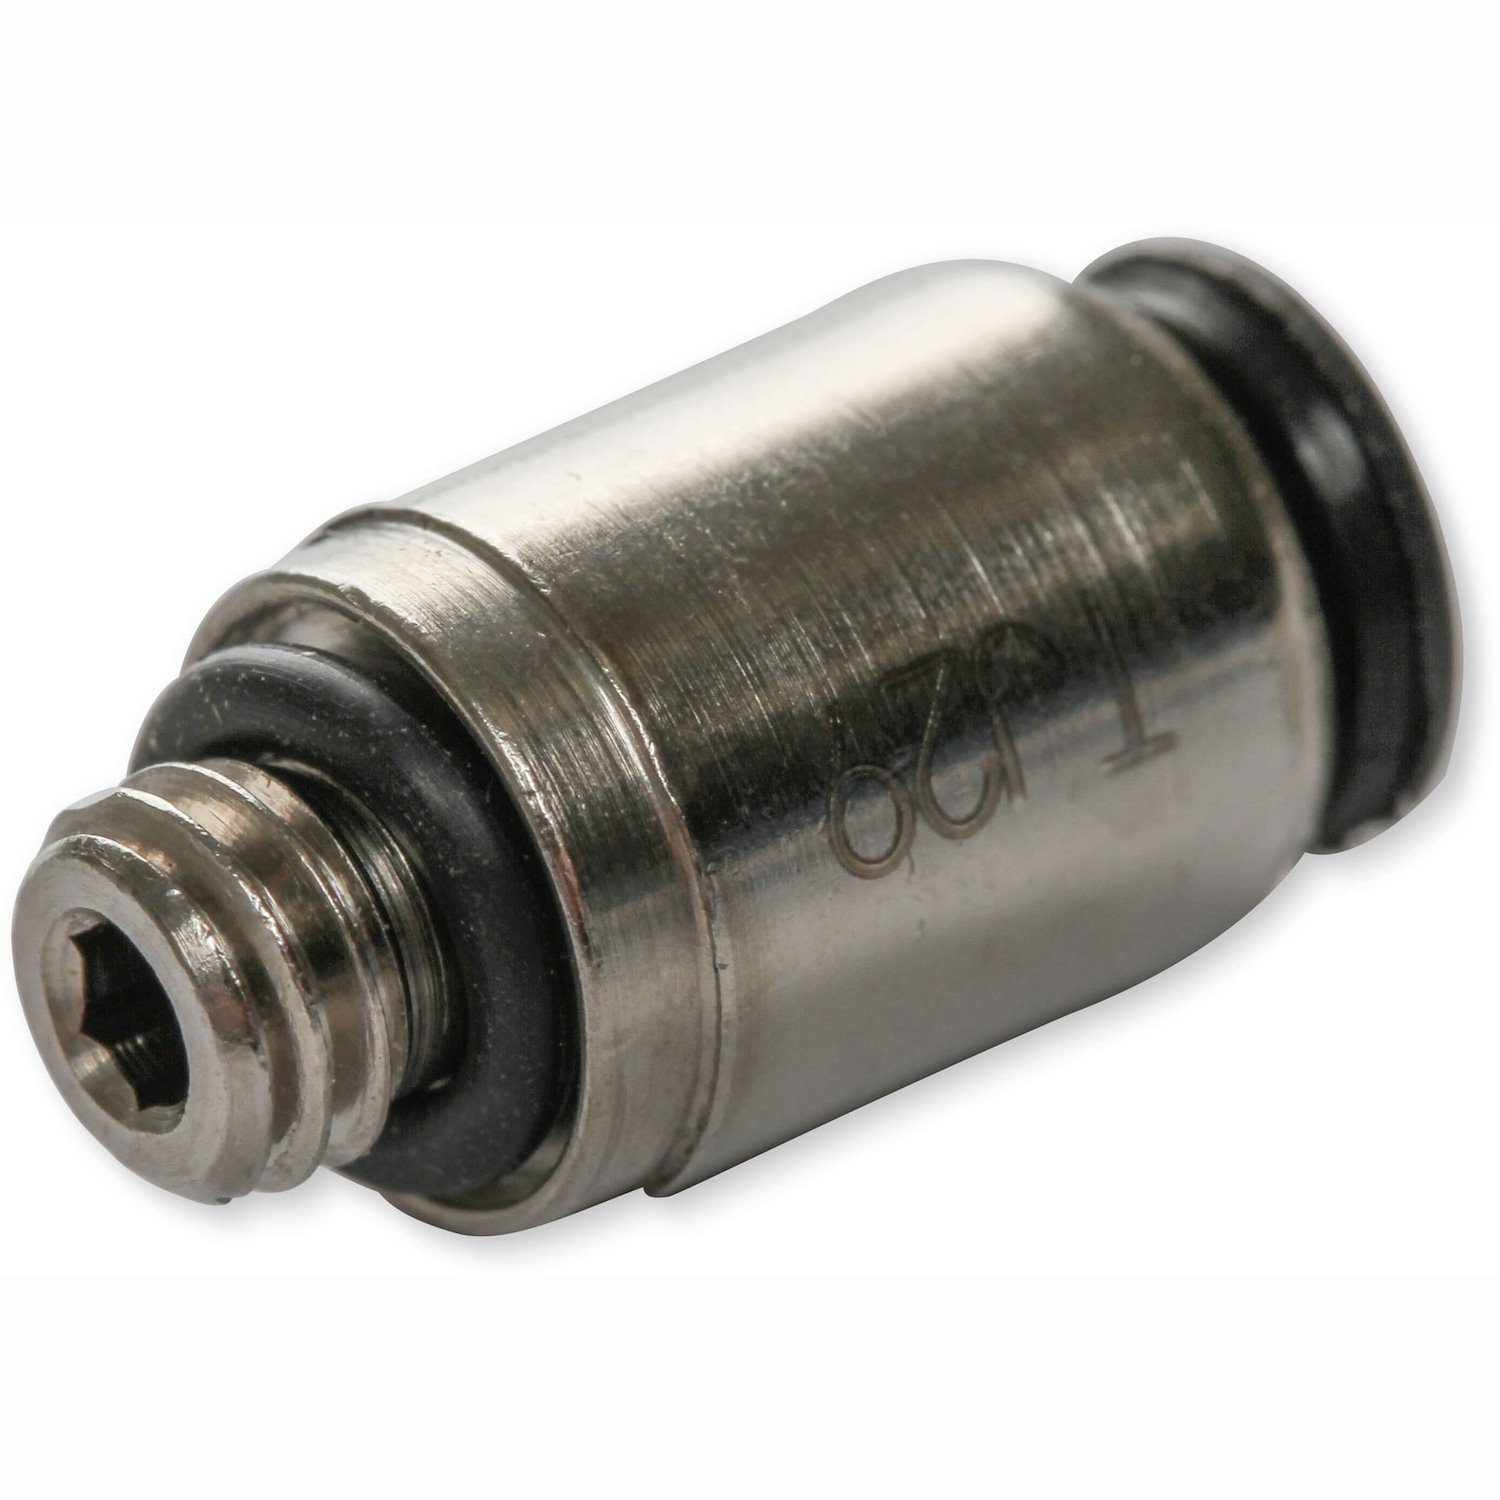 Push Lock Compression Fitting [10-32 Male to 1/8 in. Tube]